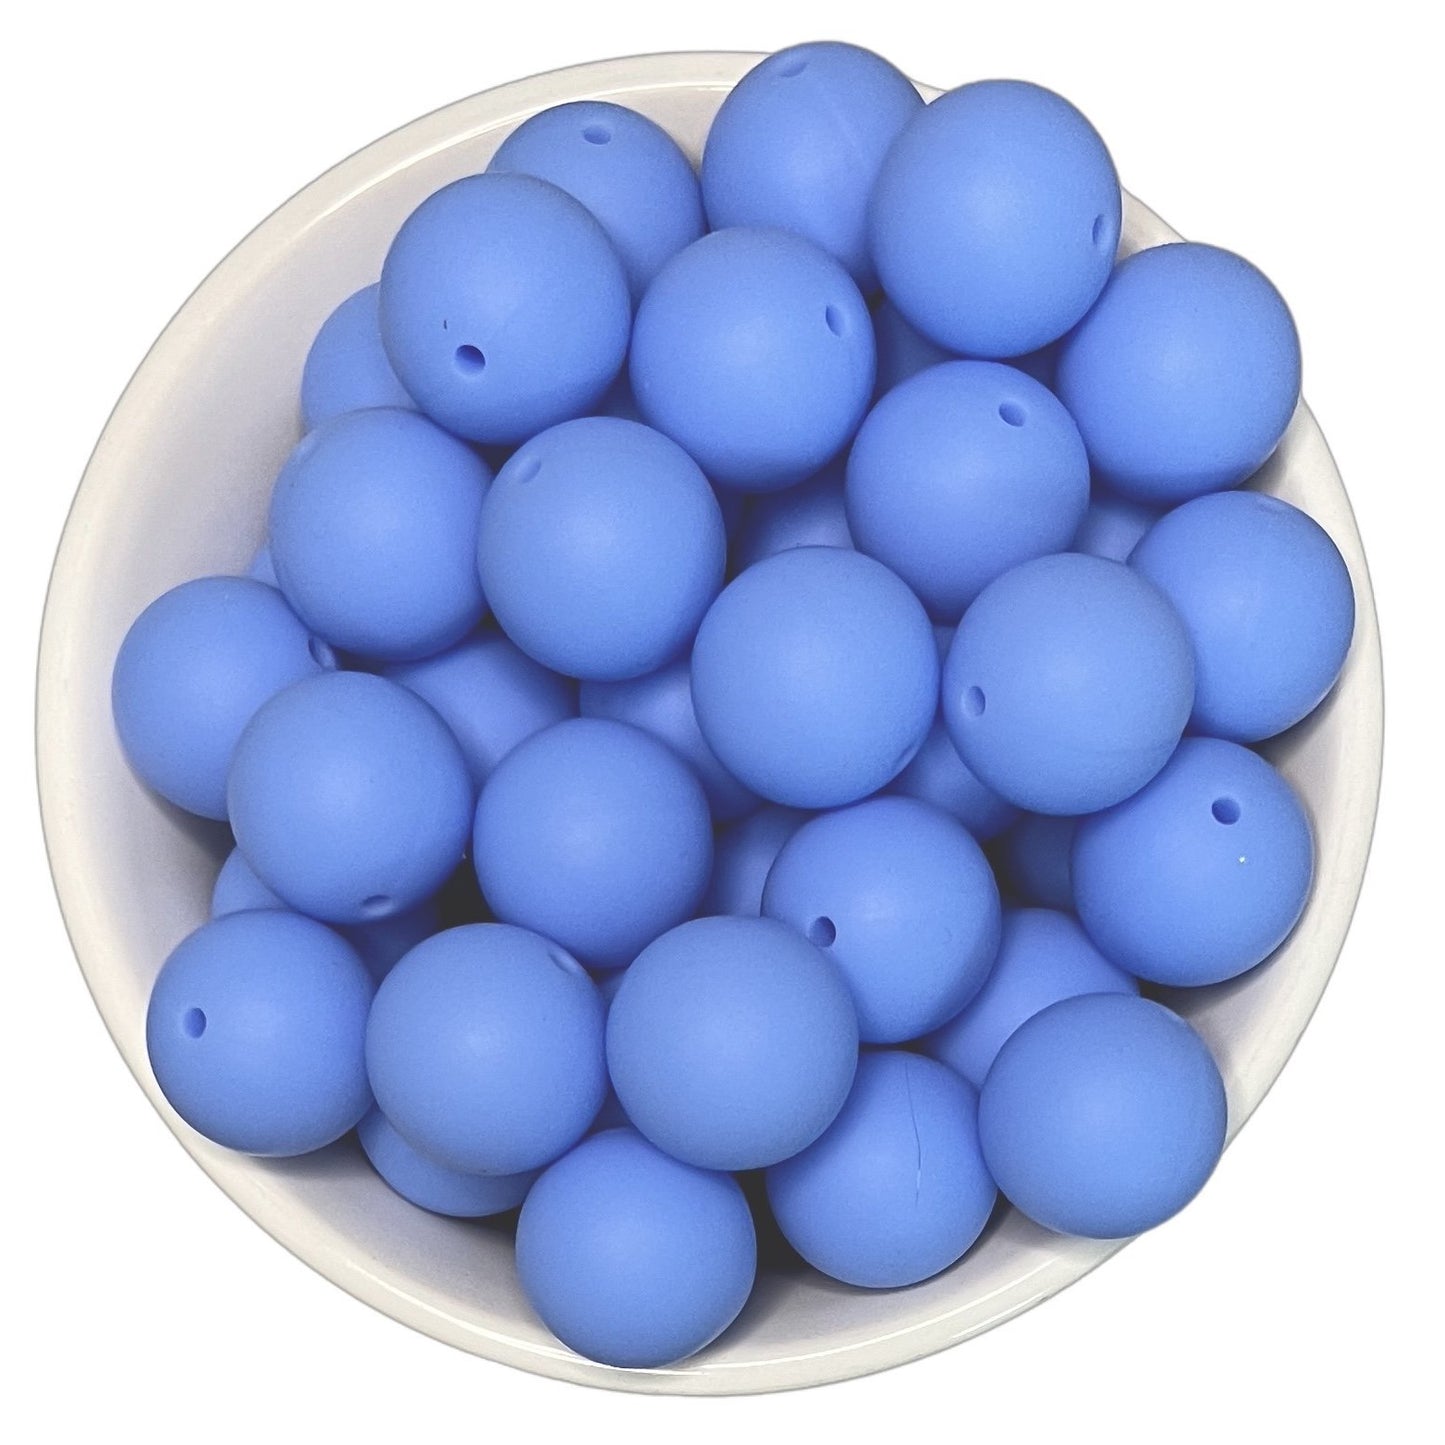 Serenity 15mm Silicone Beads - 10 pk.